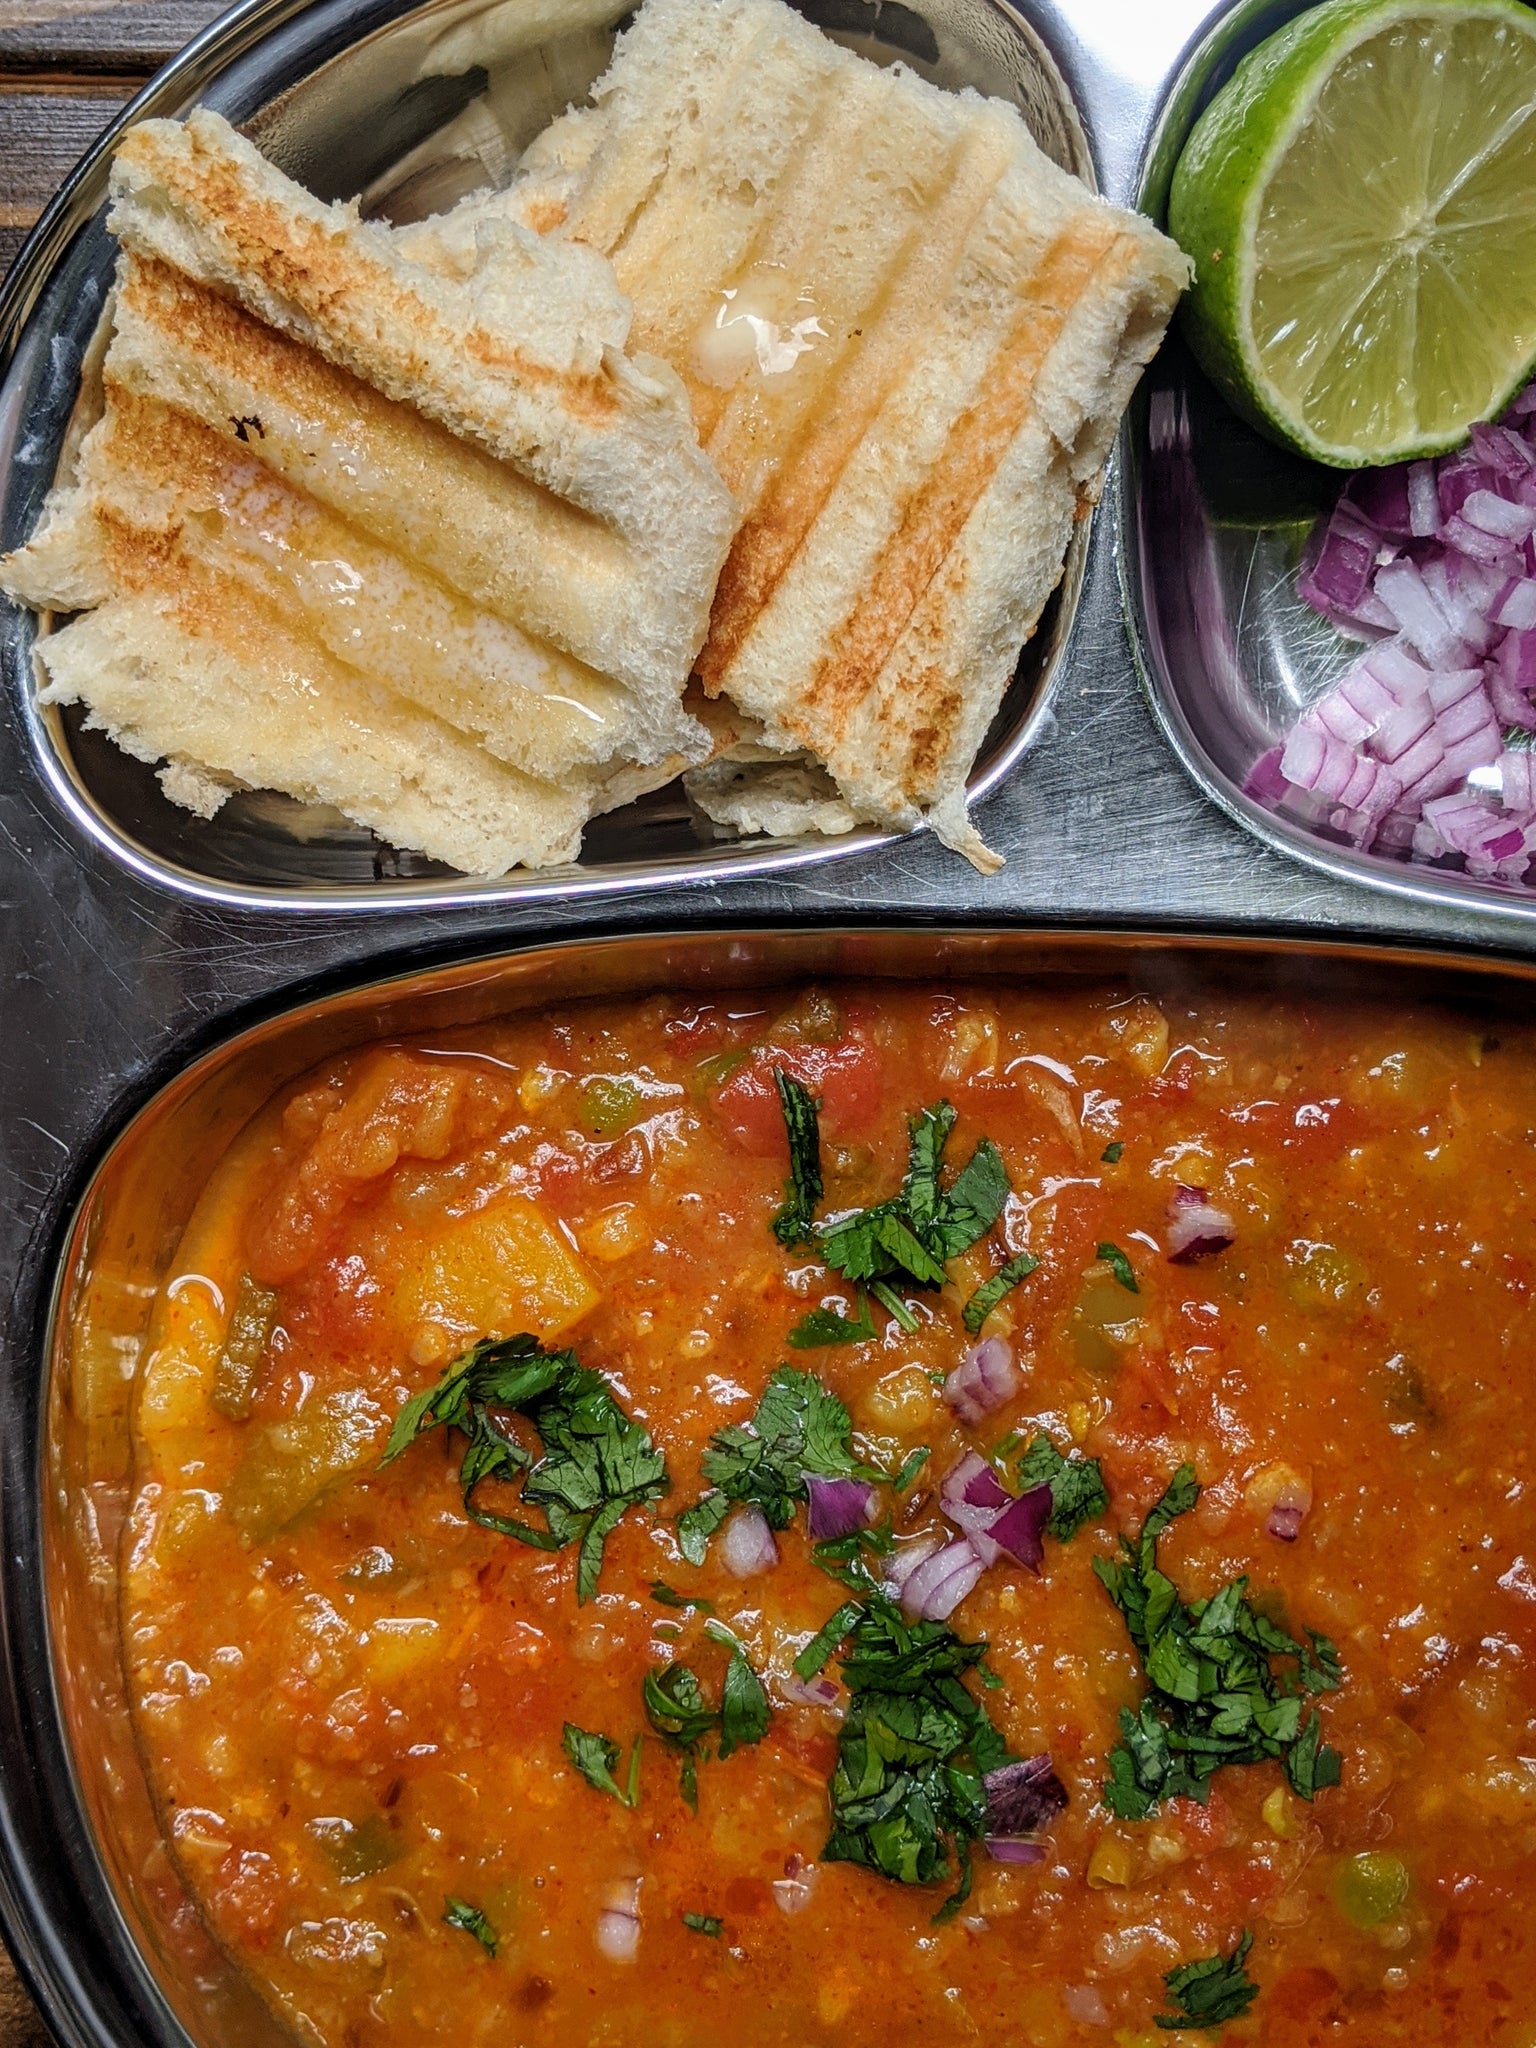 Showcasing very aromatic Pav Bhaji dish made with Spicefix Pav Bhaji Masala Blend, served along side perfectly buttered bread 